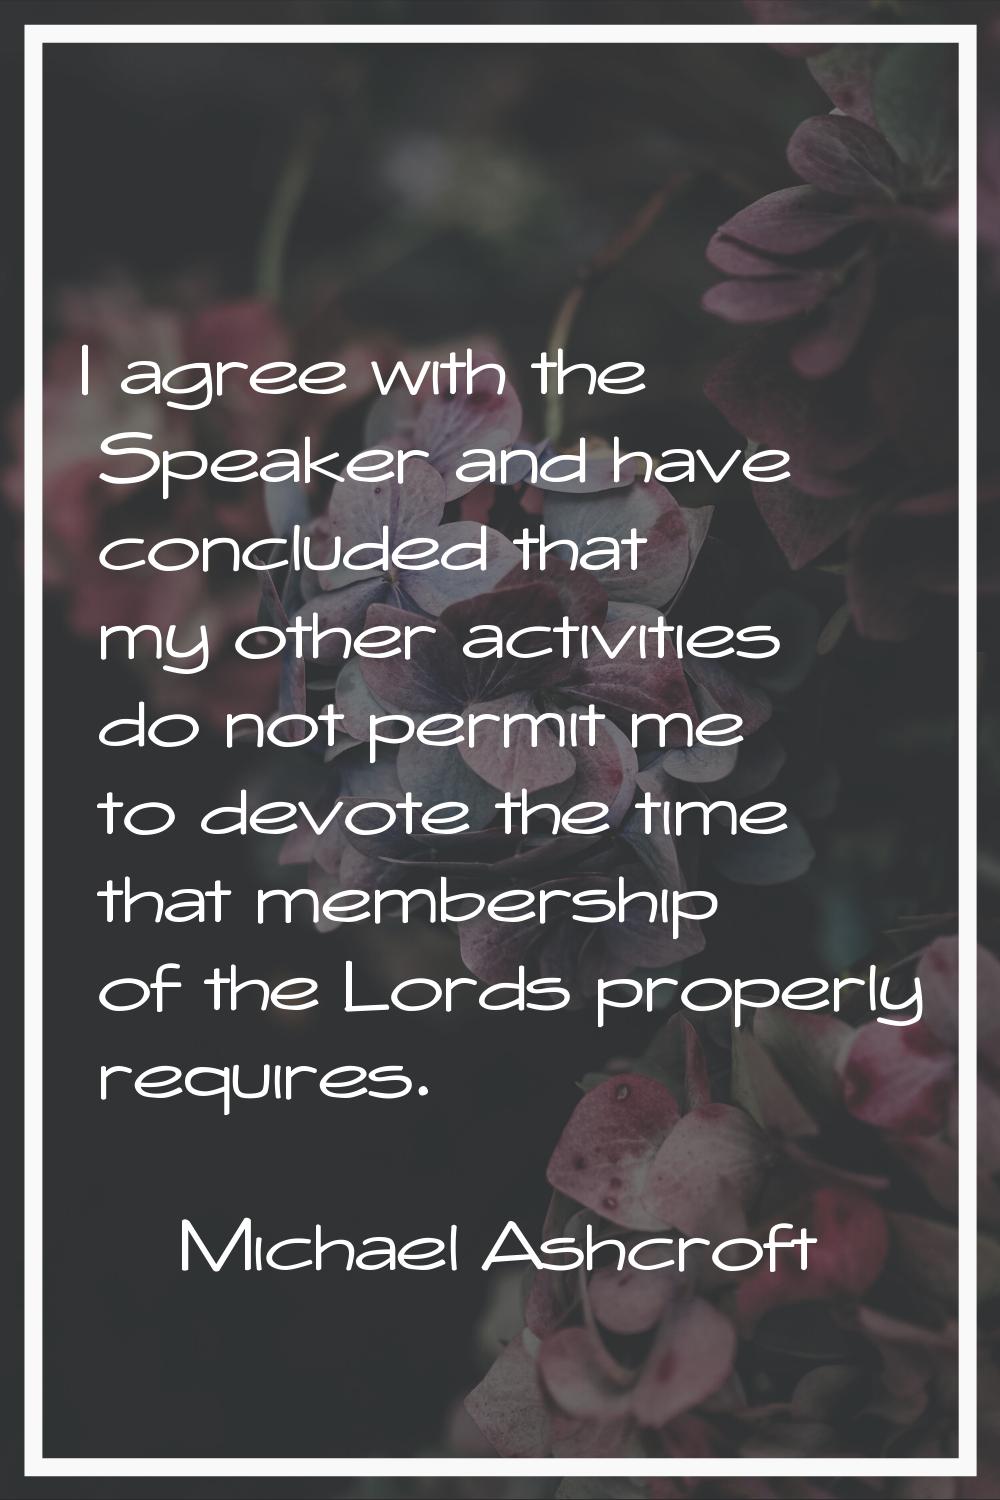 I agree with the Speaker and have concluded that my other activities do not permit me to devote the